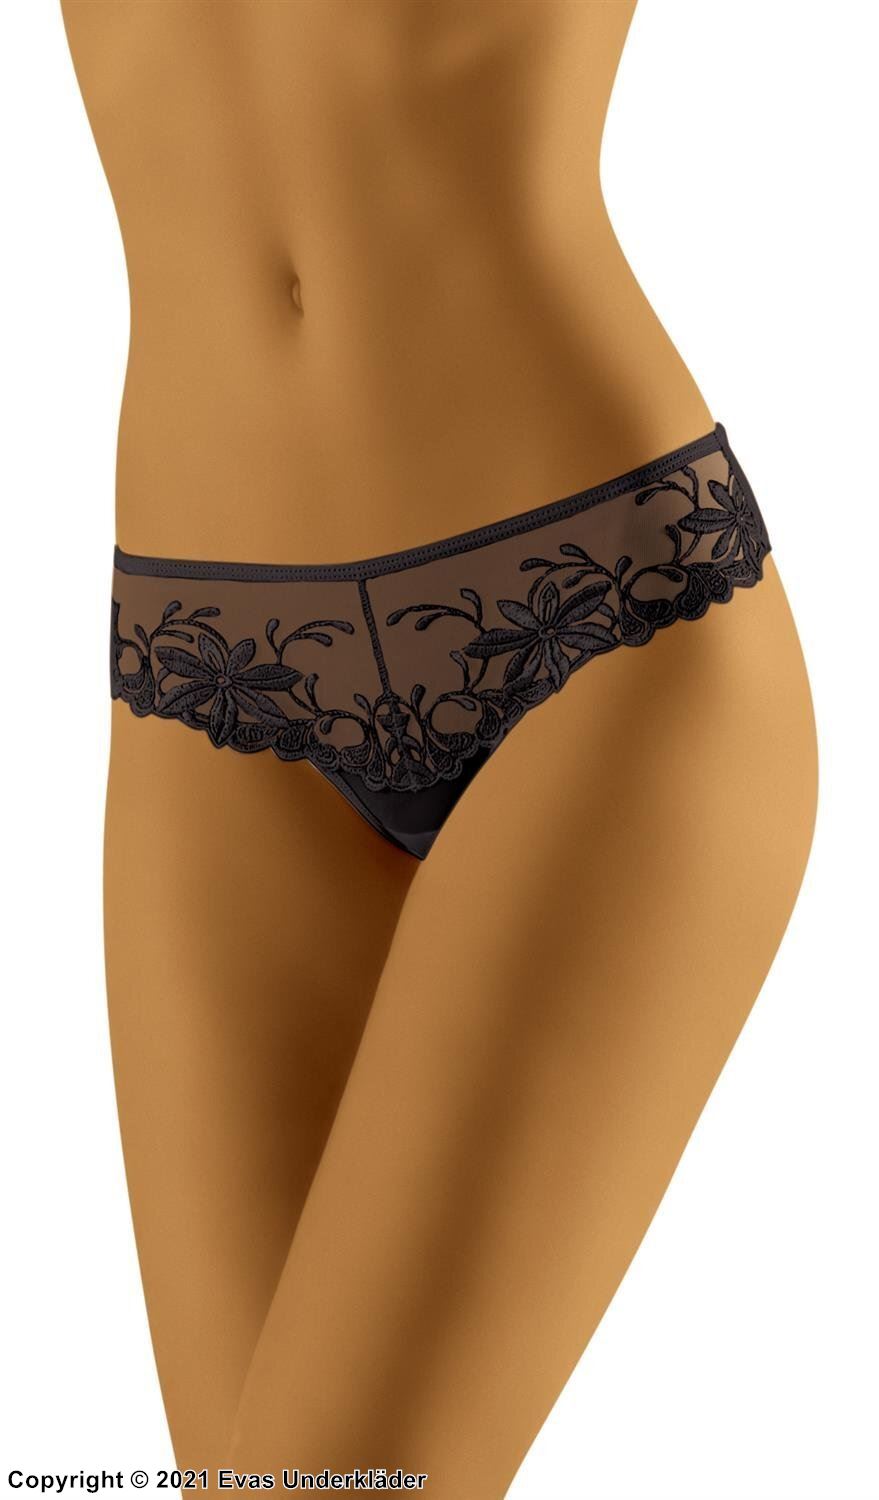 Romantic thong, sheer mesh, embroidery, flowers